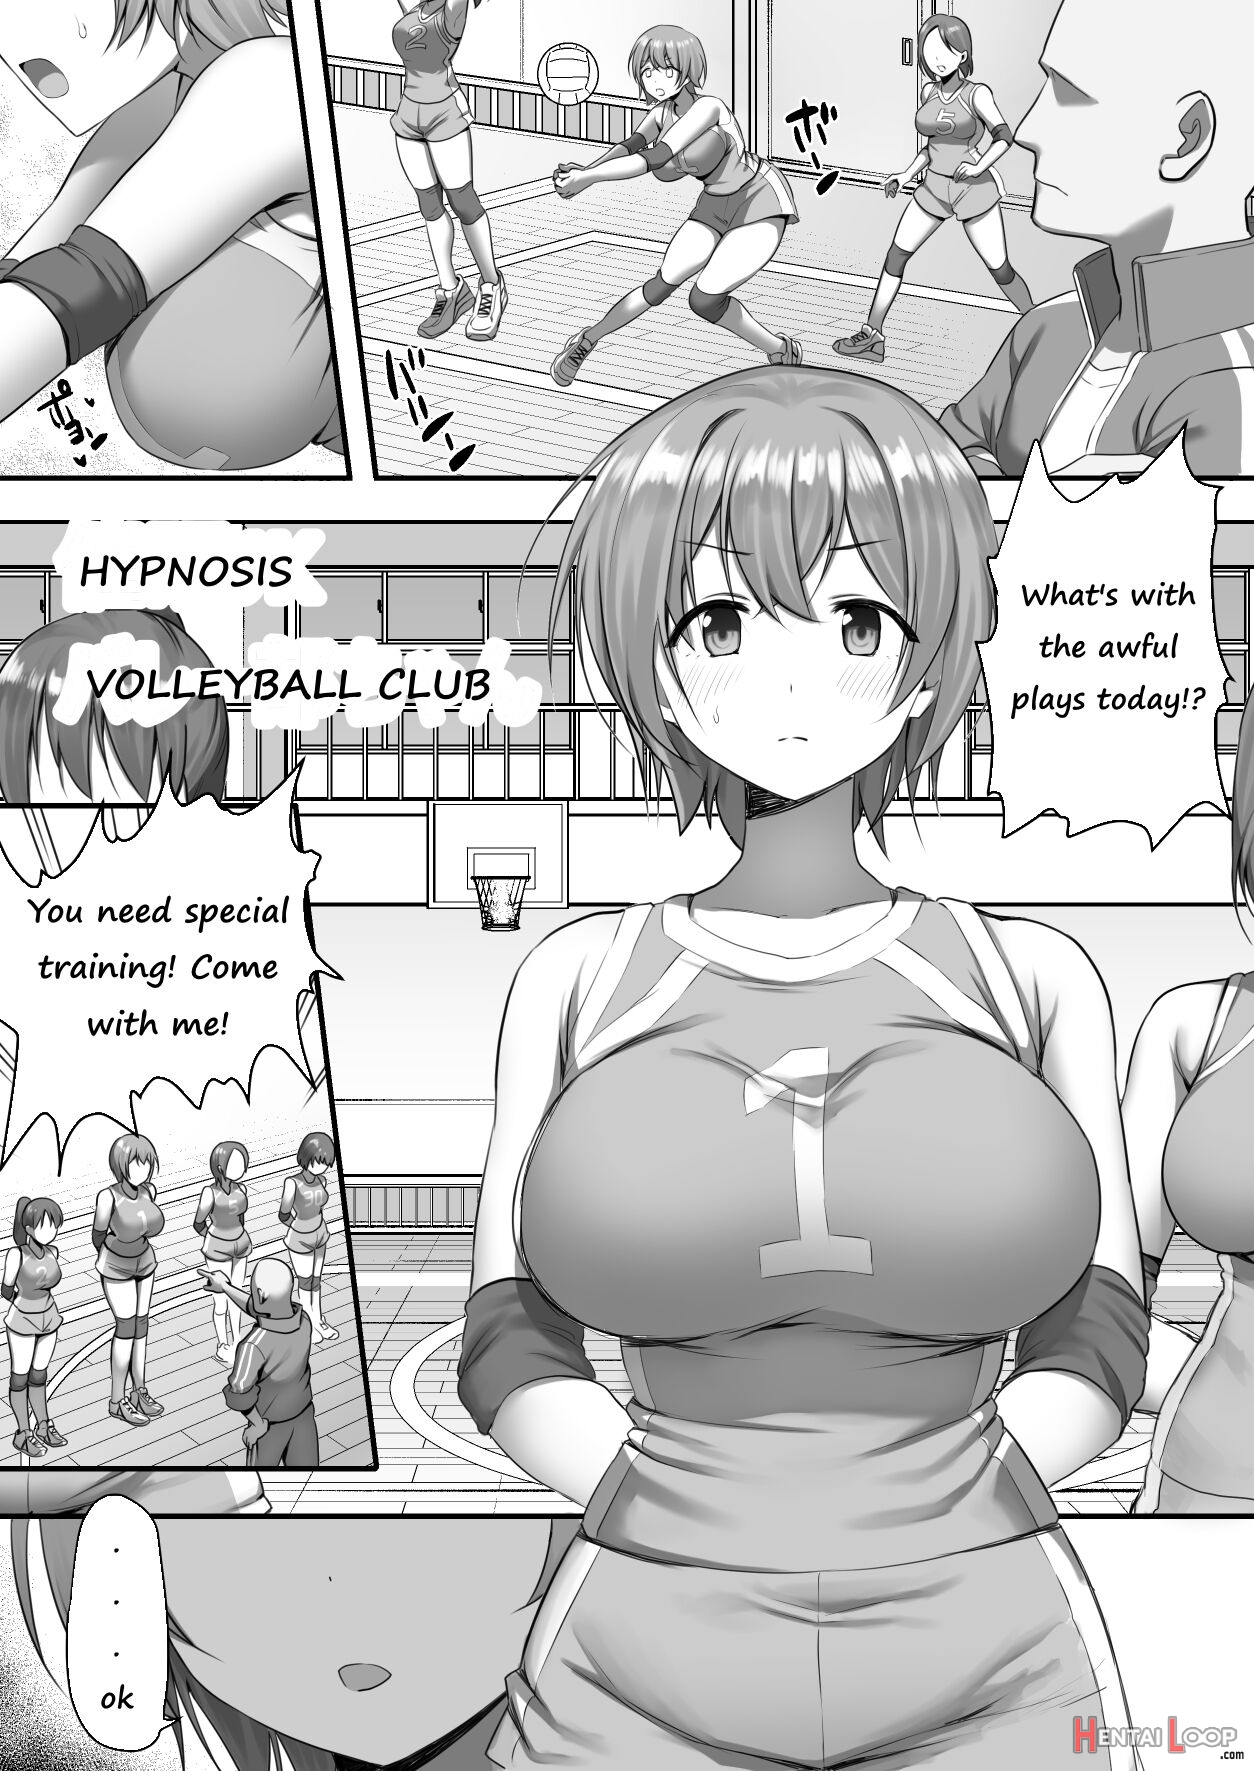 Hypnosis Volleyball Club page 1